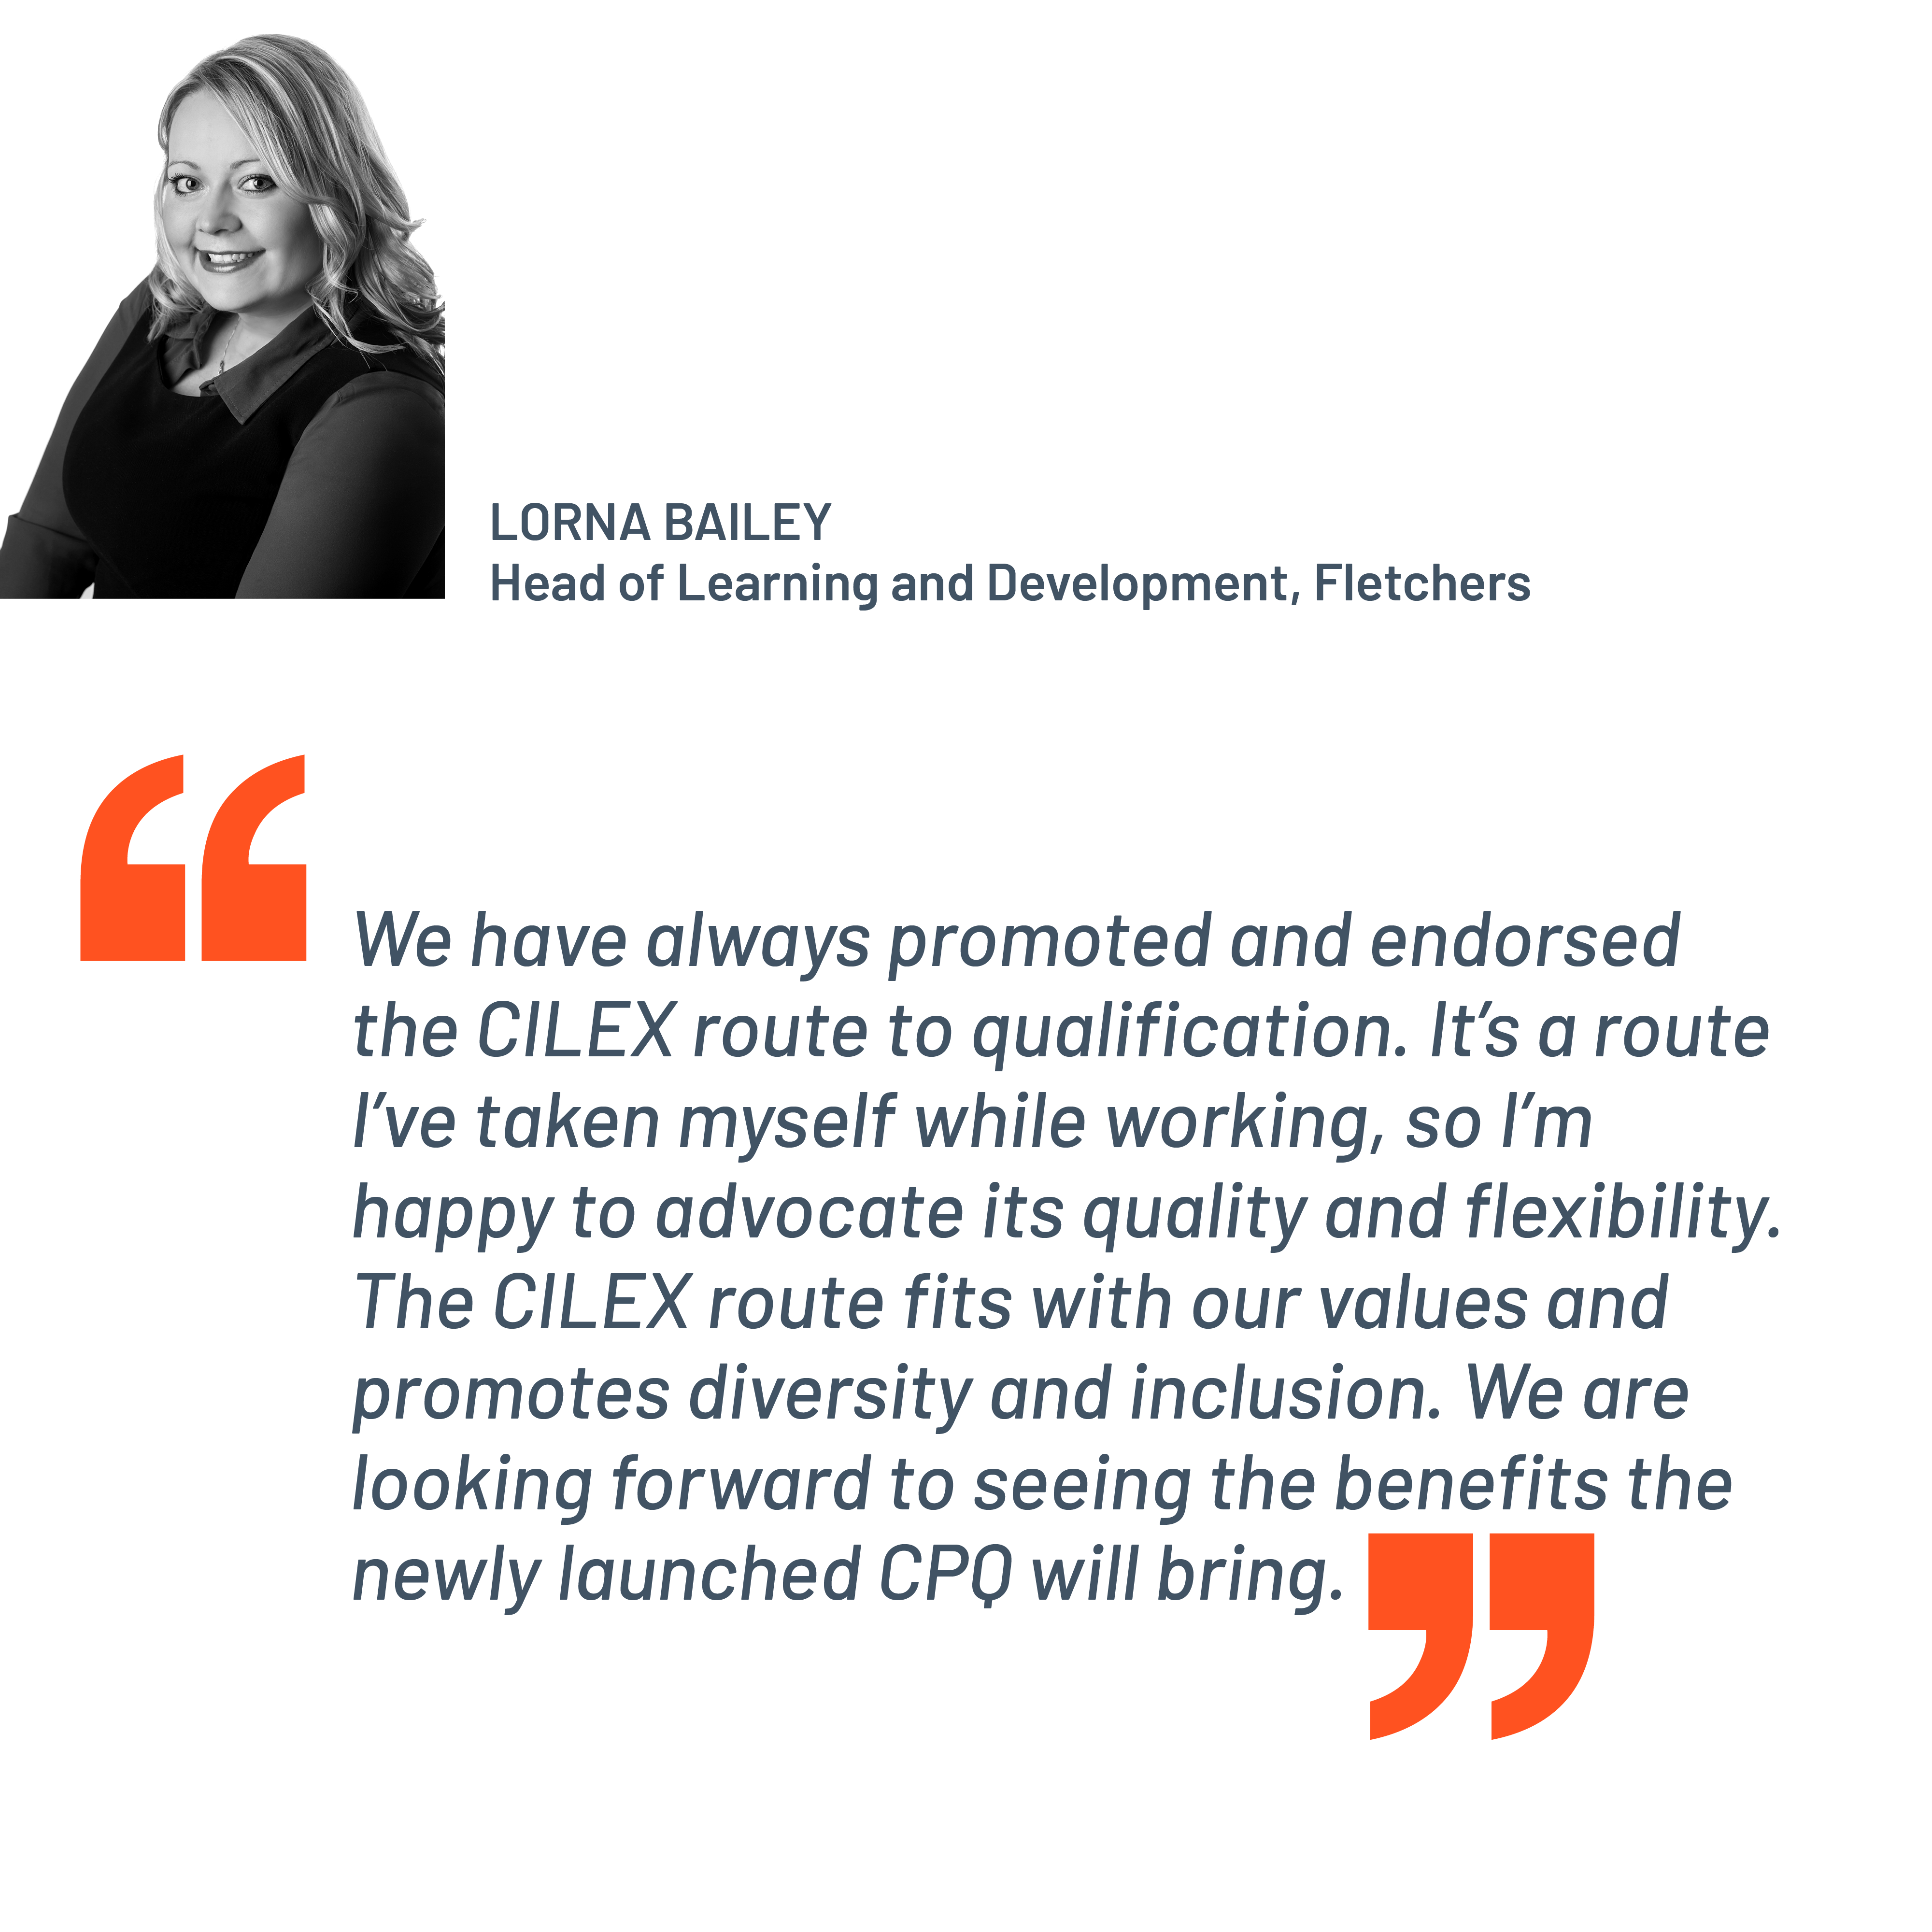 Quote from Lorna Bailey, Head of Learning and Development, Fletchers. "We have always promoted and endorsed the CILEX route to qualification. It's a route I've taken myself while working, so I’m happy to advocate its quality and flexibility. The CILEX route fits with our values and promotes diversity and inclusion. We are looking forward to seeing the benefits the newly launched CPQ will bring."